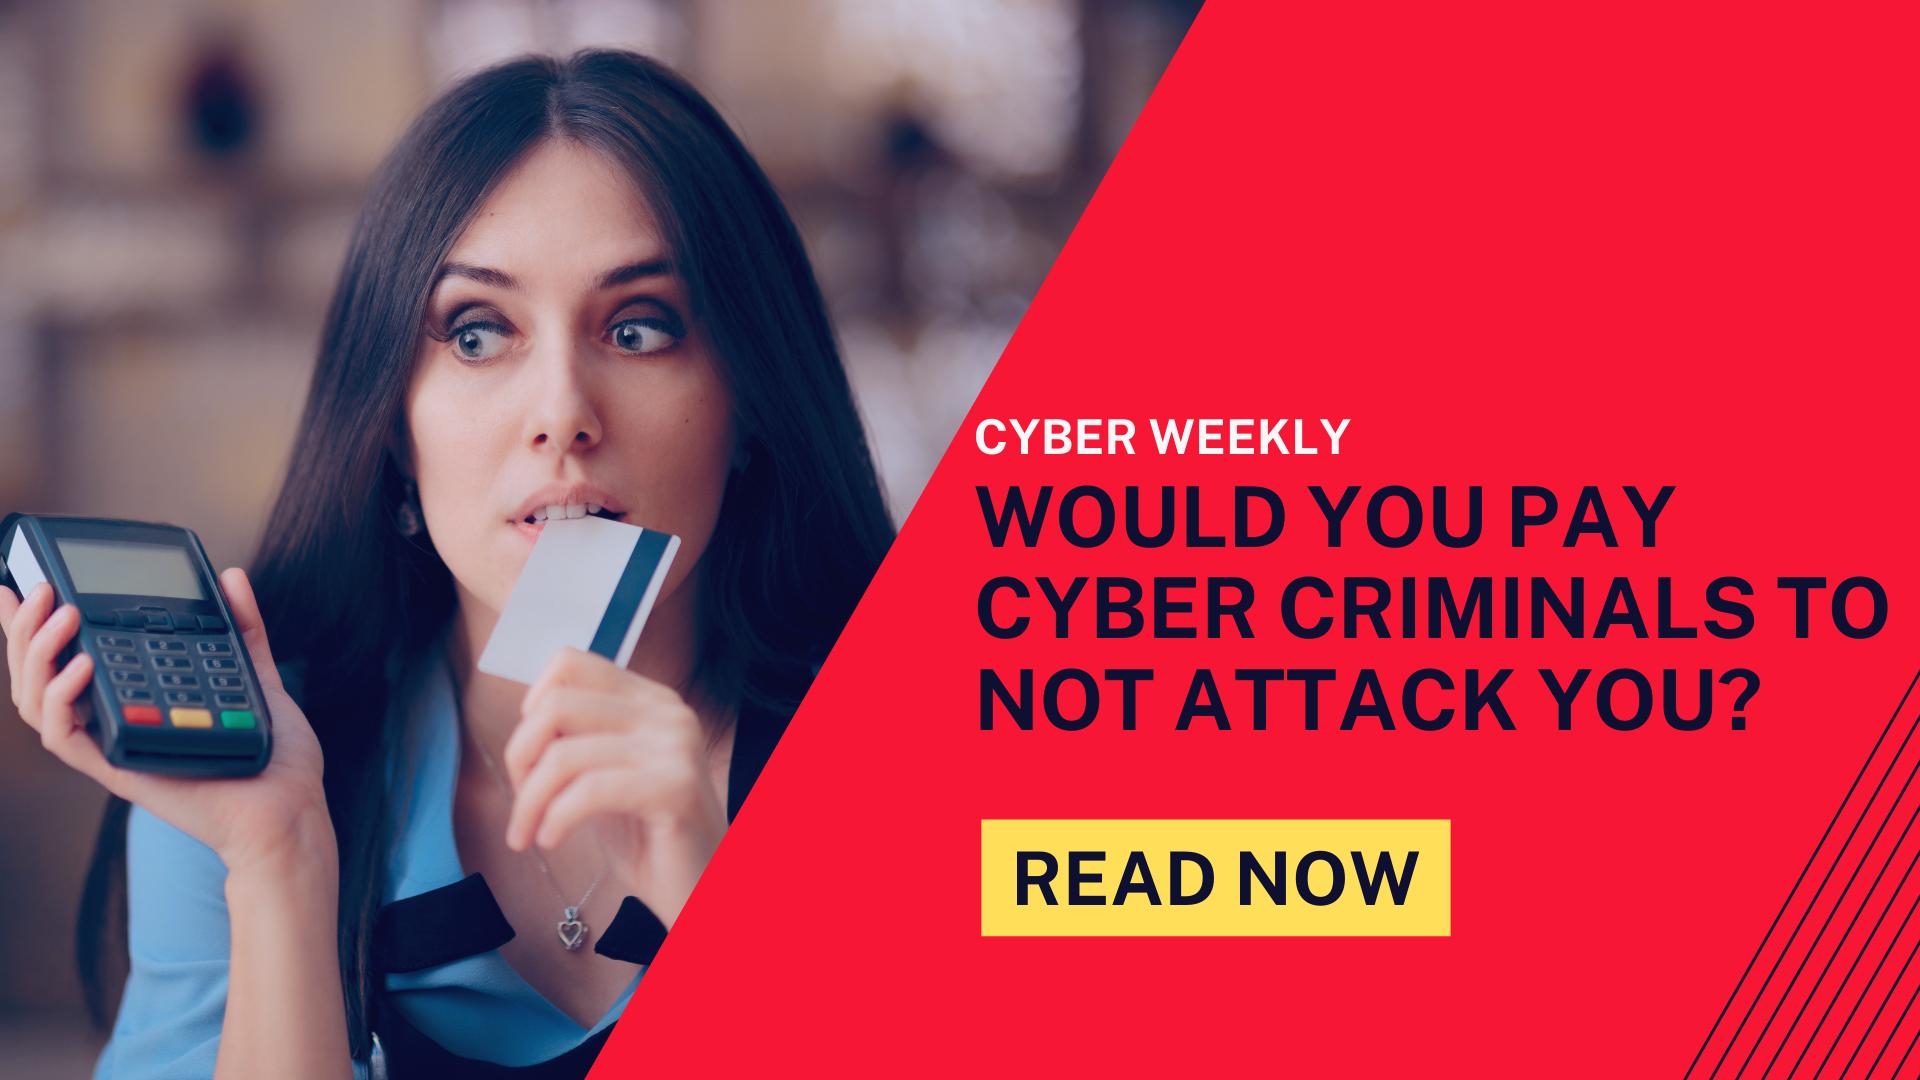 Would you pay Cyber Criminals to NOT Attack You?